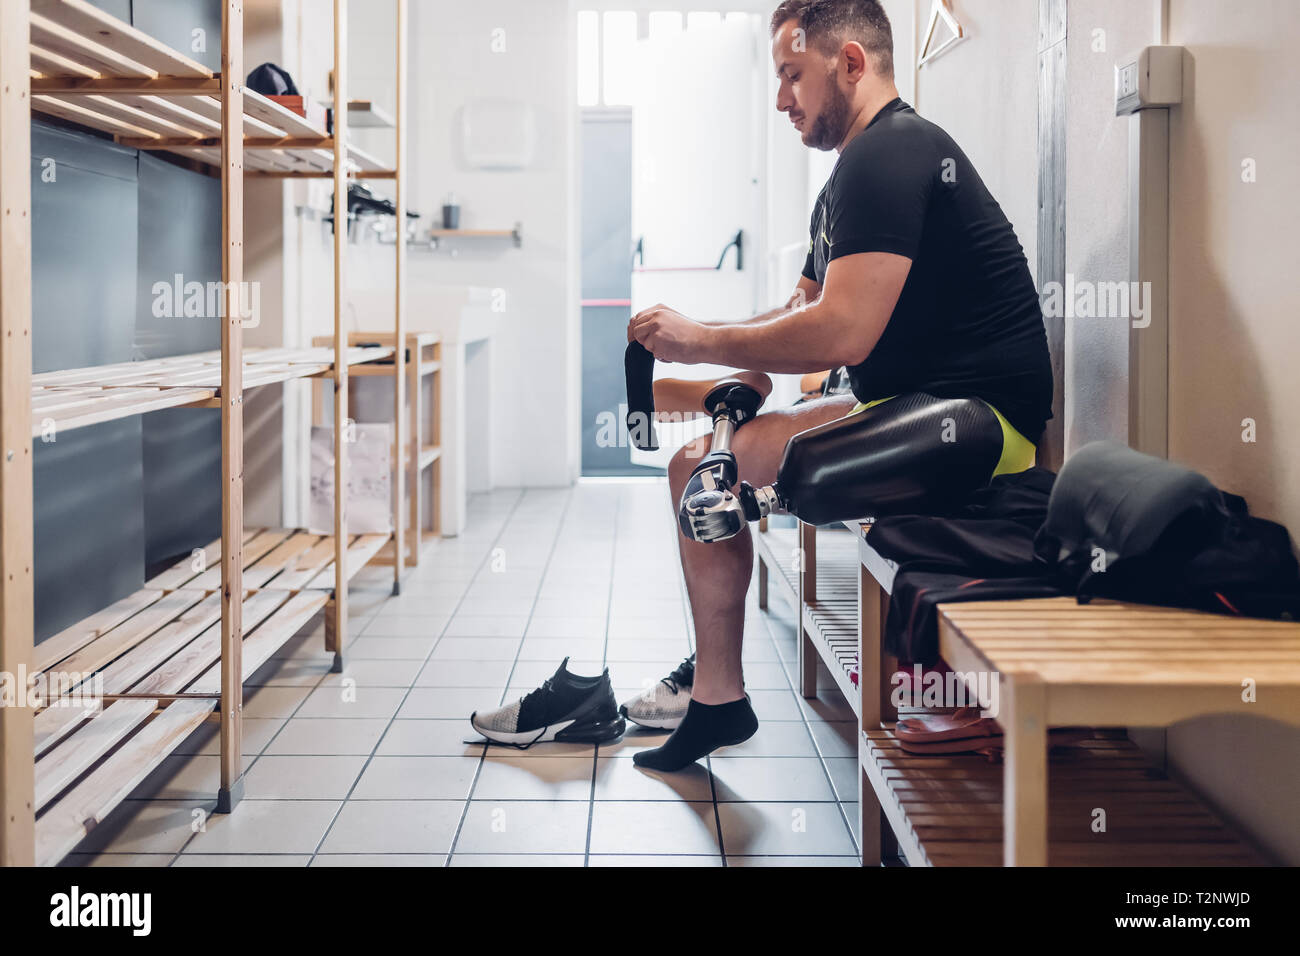 Man with prosthetic leg in gym changing room Stock Photo